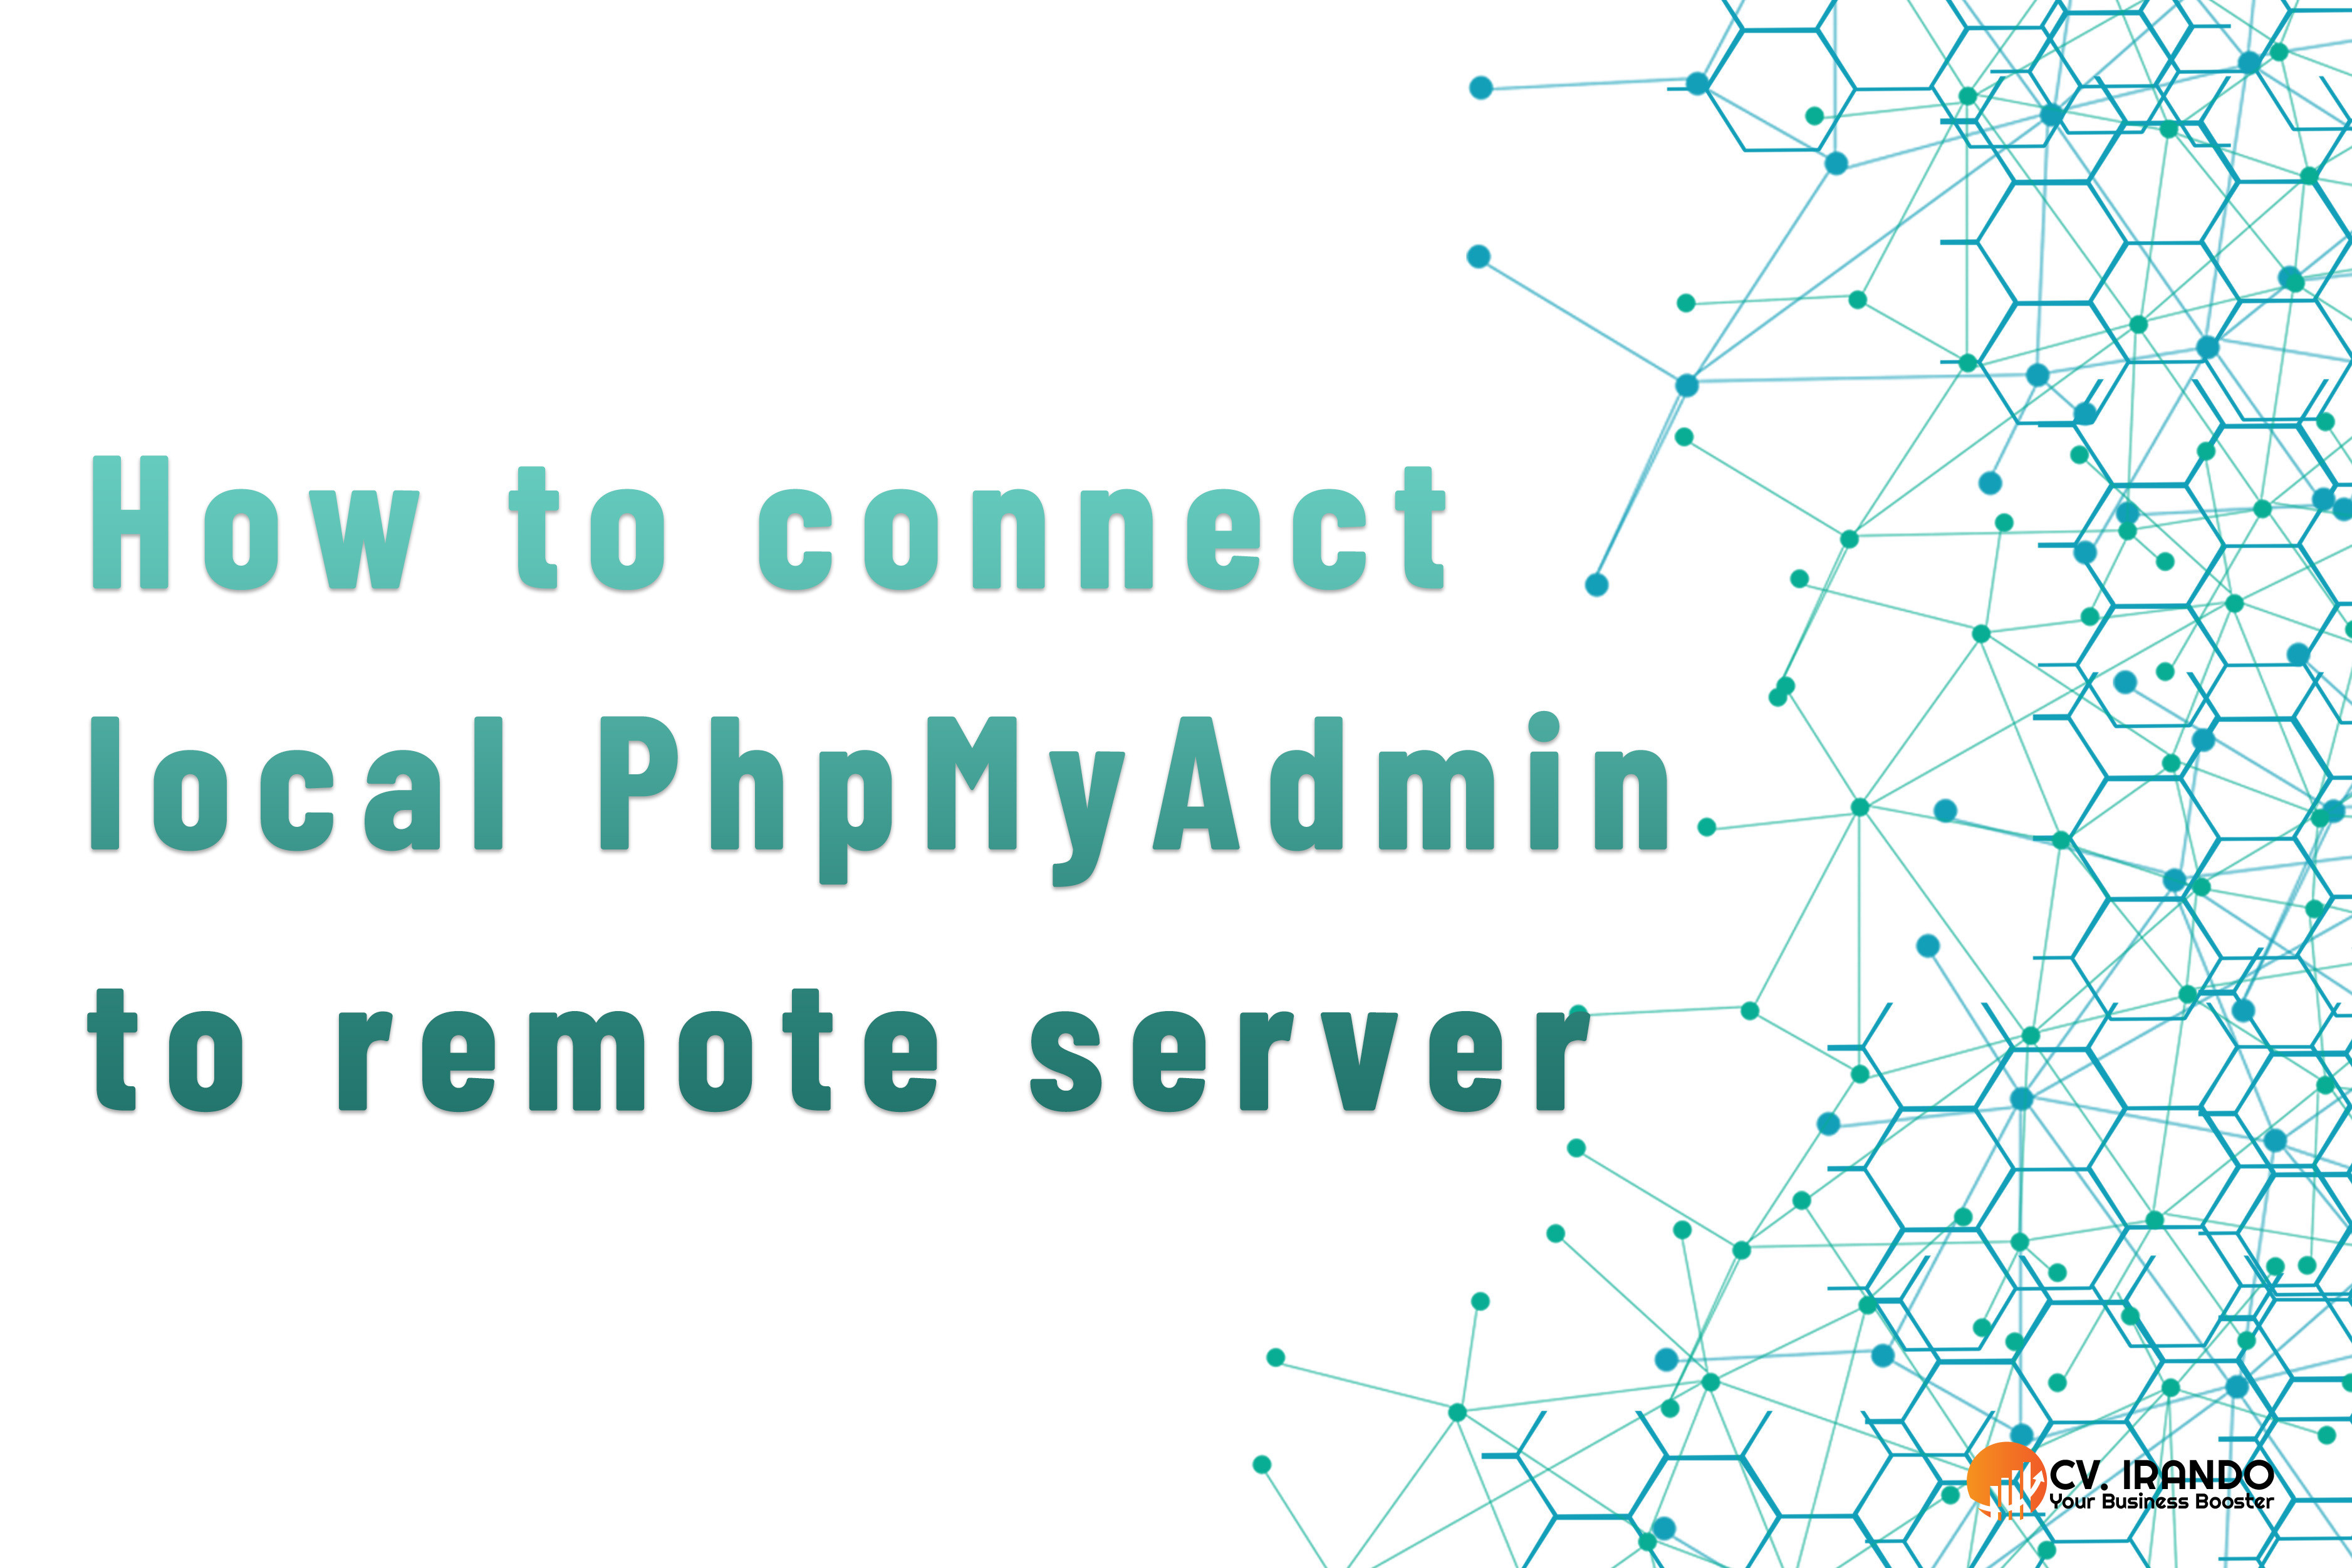 How to connect local PhpMyAdmin to remote server